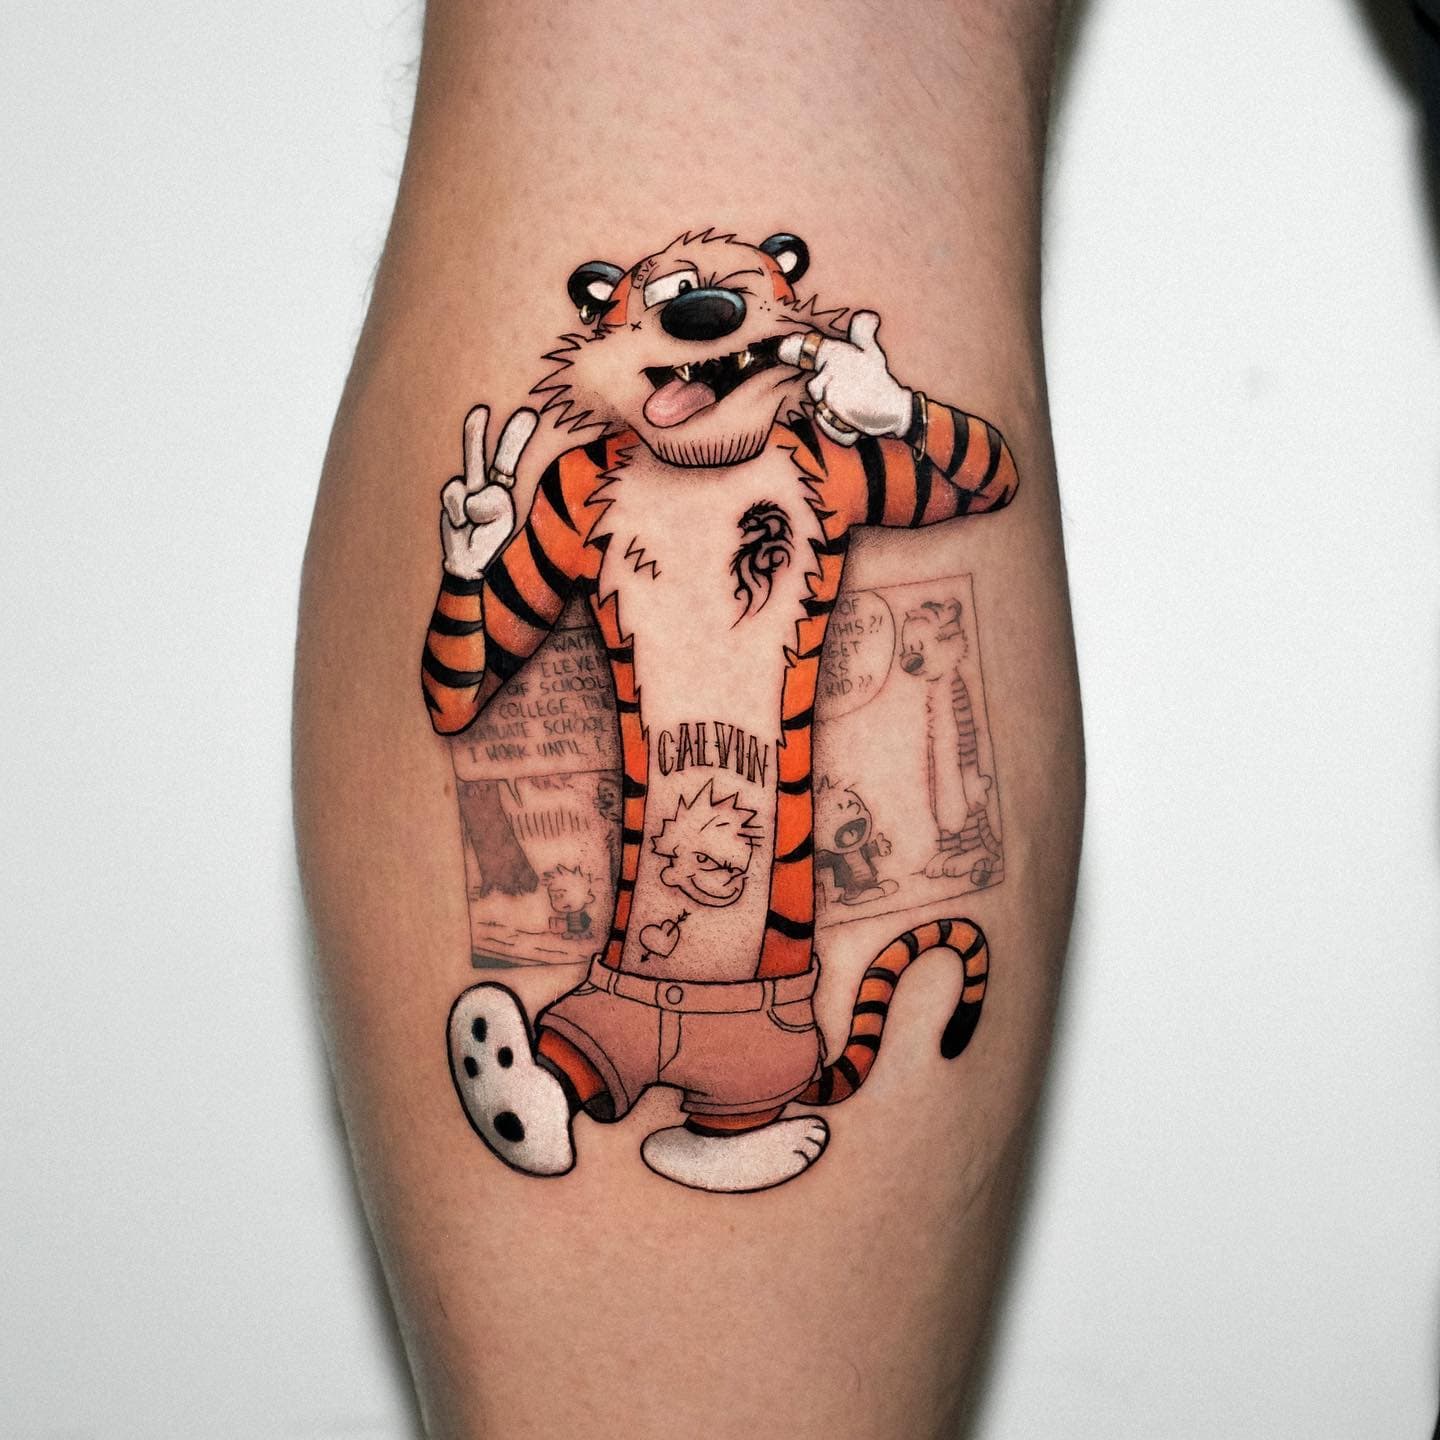 Vitamin Ink Tattoos  Little Calvin and Hobbes piece by  shittywizardtattoos Please lets do more old cartoons like this Book  yours noe082 5133 687             